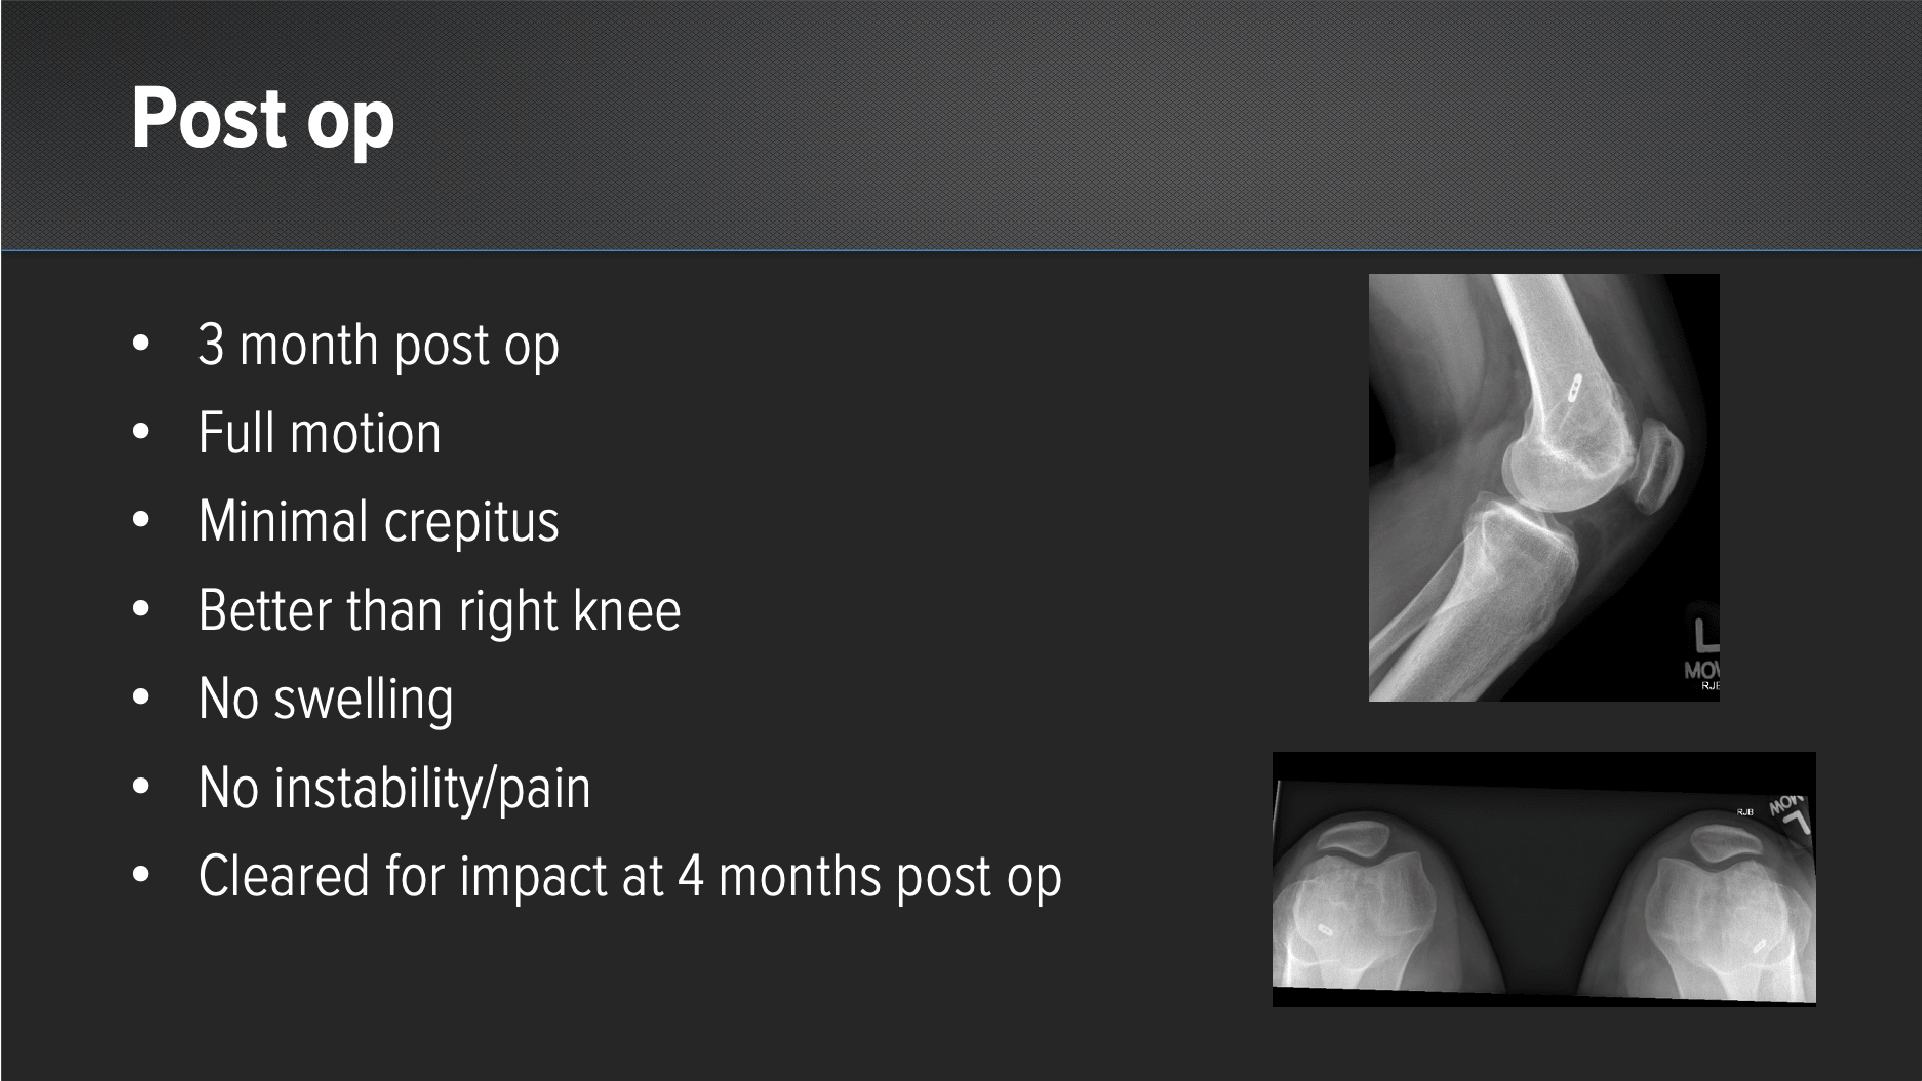 Complex Trochlear Cartilage Defect Repair With Cartiform® Viable Osteochondral Allograft